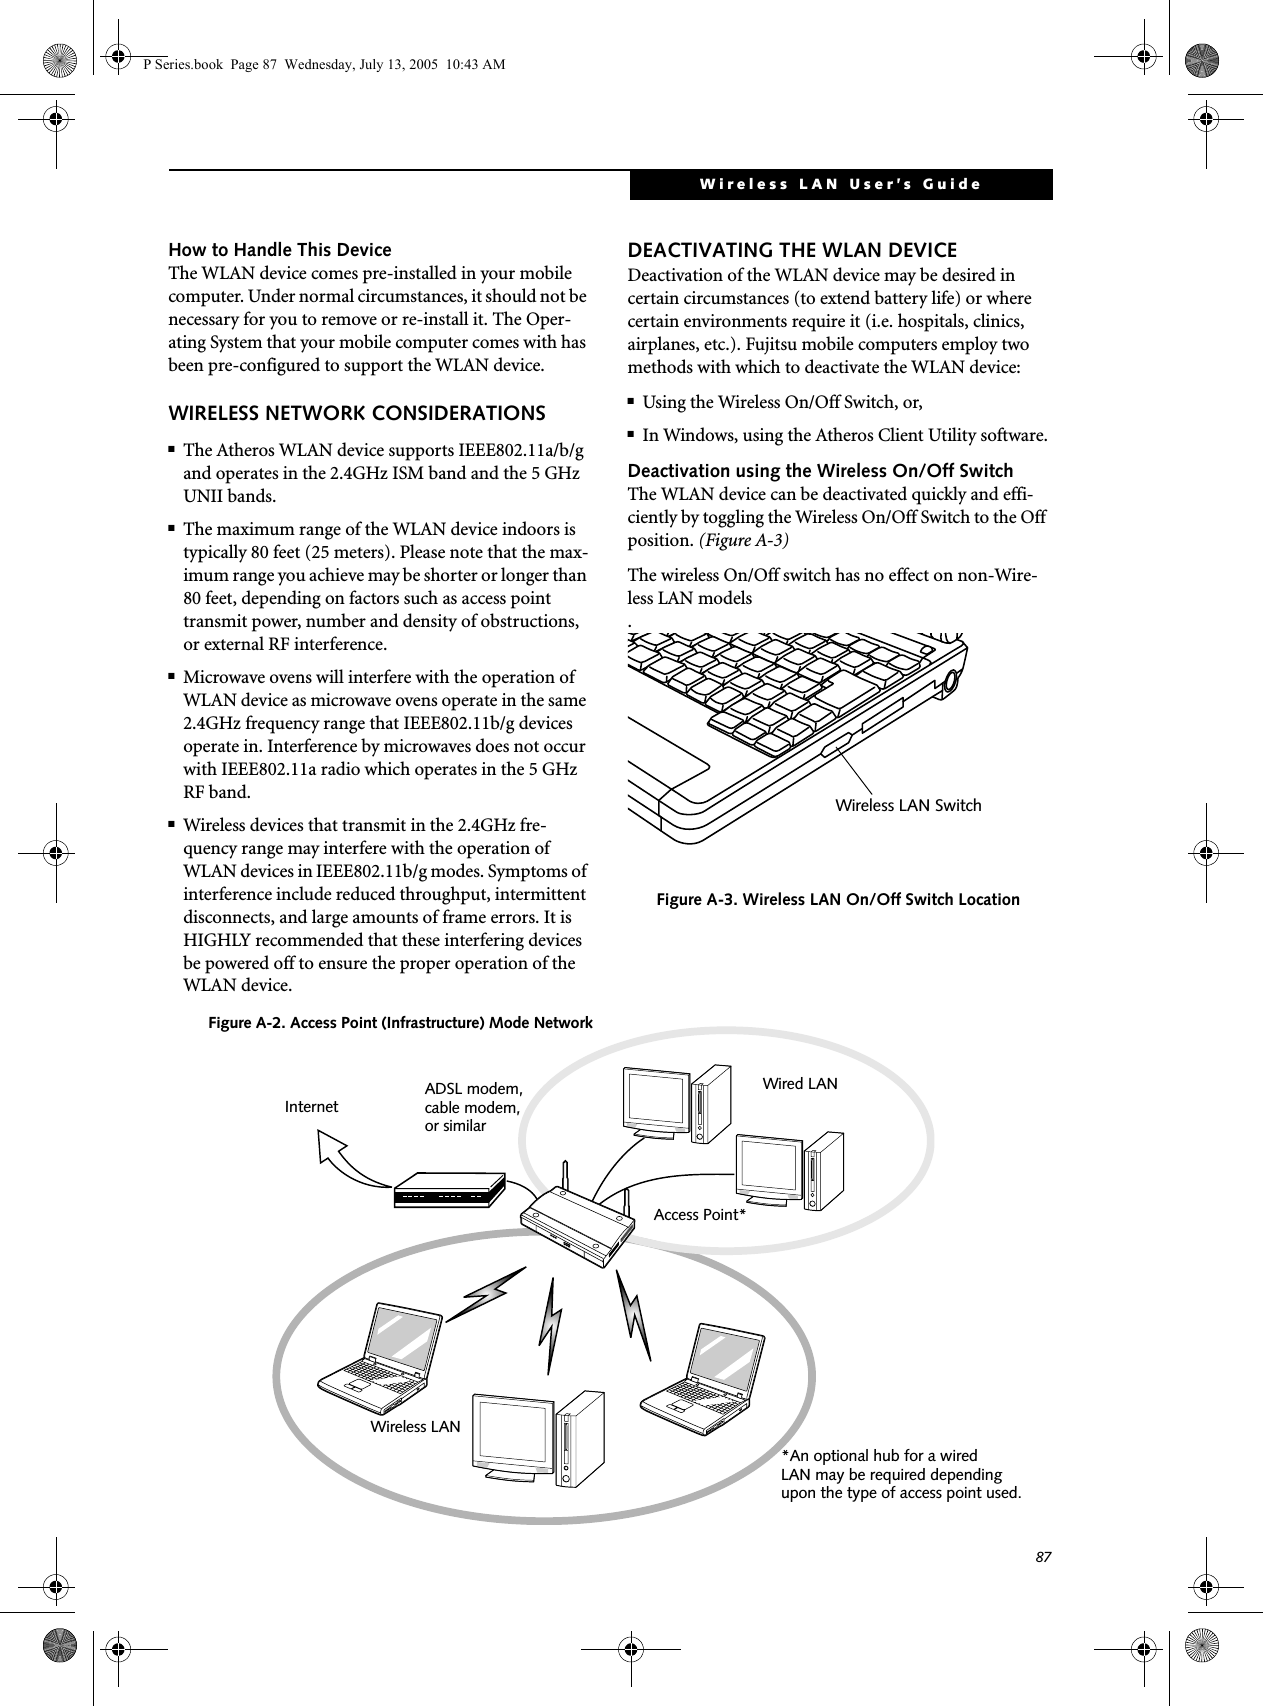 87Wireless LAN User’s Guide How to Handle This DeviceThe WLAN device comes pre-installed in your mobile computer. Under normal circumstances, it should not be necessary for you to remove or re-install it. The Oper-ating System that your mobile computer comes with has been pre-configured to support the WLAN device. WIRELESS NETWORK CONSIDERATIONS■The Atheros WLAN device supports IEEE802.11a/b/g and operates in the 2.4GHz ISM band and the 5 GHz UNII bands.■The maximum range of the WLAN device indoors is typically 80 feet (25 meters). Please note that the max-imum range you achieve may be shorter or longer than 80 feet, depending on factors such as access point transmit power, number and density of obstructions, or external RF interference.■Microwave ovens will interfere with the operation of WLAN device as microwave ovens operate in the same 2.4GHz frequency range that IEEE802.11b/g devices operate in. Interference by microwaves does not occur with IEEE802.11a radio which operates in the 5 GHz RF band.■Wireless devices that transmit in the 2.4GHz fre-quency range may interfere with the operation of WLAN devices in IEEE802.11b/g modes. Symptoms of interference include reduced throughput, intermittent disconnects, and large amounts of frame errors. It is HIGHLY recommended that these interfering devices be powered off to ensure the proper operation of the WLAN device.DEACTIVATING THE WLAN DEVICEDeactivation of the WLAN device may be desired in certain circumstances (to extend battery life) or where certain environments require it (i.e. hospitals, clinics, airplanes, etc.). Fujitsu mobile computers employ two methods with which to deactivate the WLAN device:■Using the Wireless On/Off Switch, or,■In Windows, using the Atheros Client Utility software.Deactivation using the Wireless On/Off SwitchThe WLAN device can be deactivated quickly and effi-ciently by toggling the Wireless On/Off Switch to the Off position. (Figure A-3)The wireless On/Off switch has no effect on non-Wire-less LAN models.Figure A-3. Wireless LAN On/Off Switch LocationWireless LAN SwitchFigure A-2. Access Point (Infrastructure) Mode NetworkADSL modem,cable modem,or similarInternetWired LANAccess Point*Wireless LAN*An optional hub for a wiredLAN may be required dependingupon the type of access point used.P Series.book  Page 87  Wednesday, July 13, 2005  10:43 AM